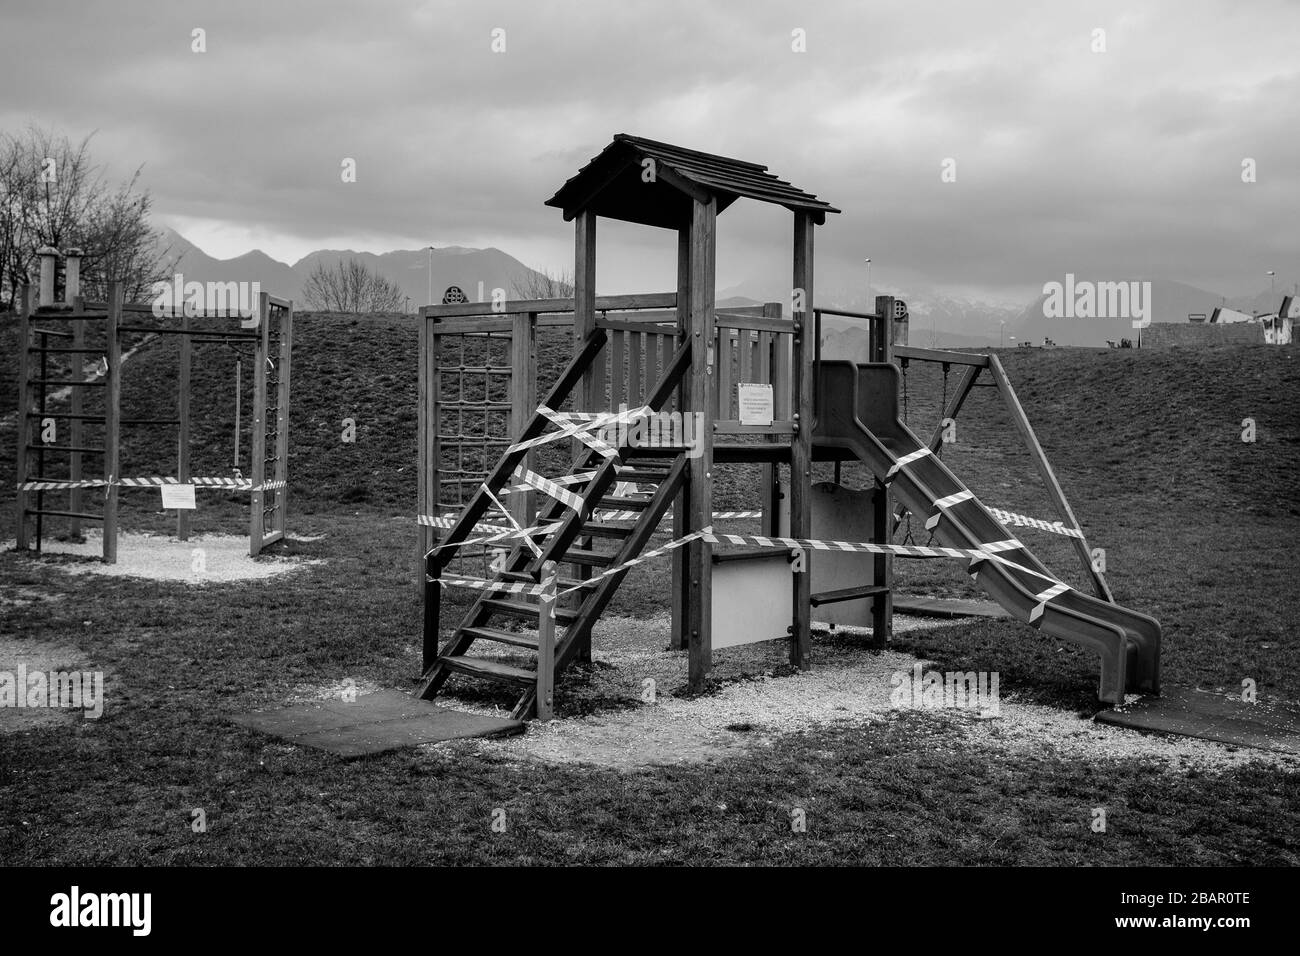 Kranj, Slovenia, March 21, 2020: A closed playground, one of early safety measures, during the coronavirus outbreak nationwide lockdown. Stock Photo